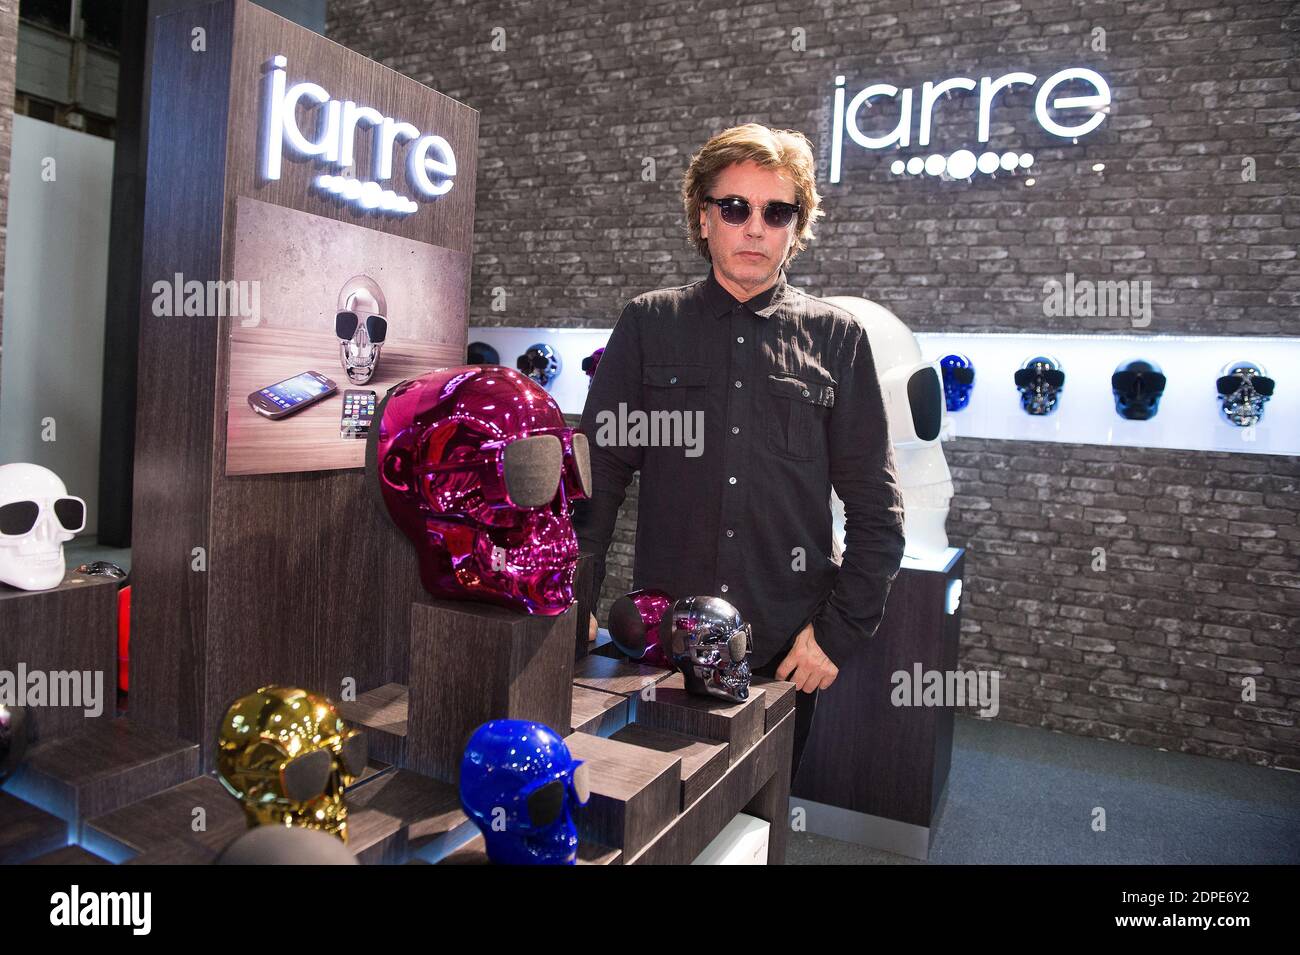 French singer, Jean-Michel Jarre poses on the stand Jarre during the press  day at the 2014 IFA home electronics and appliances trade fair, on  September 05, 2014, in Berlin, Germany, Photo by